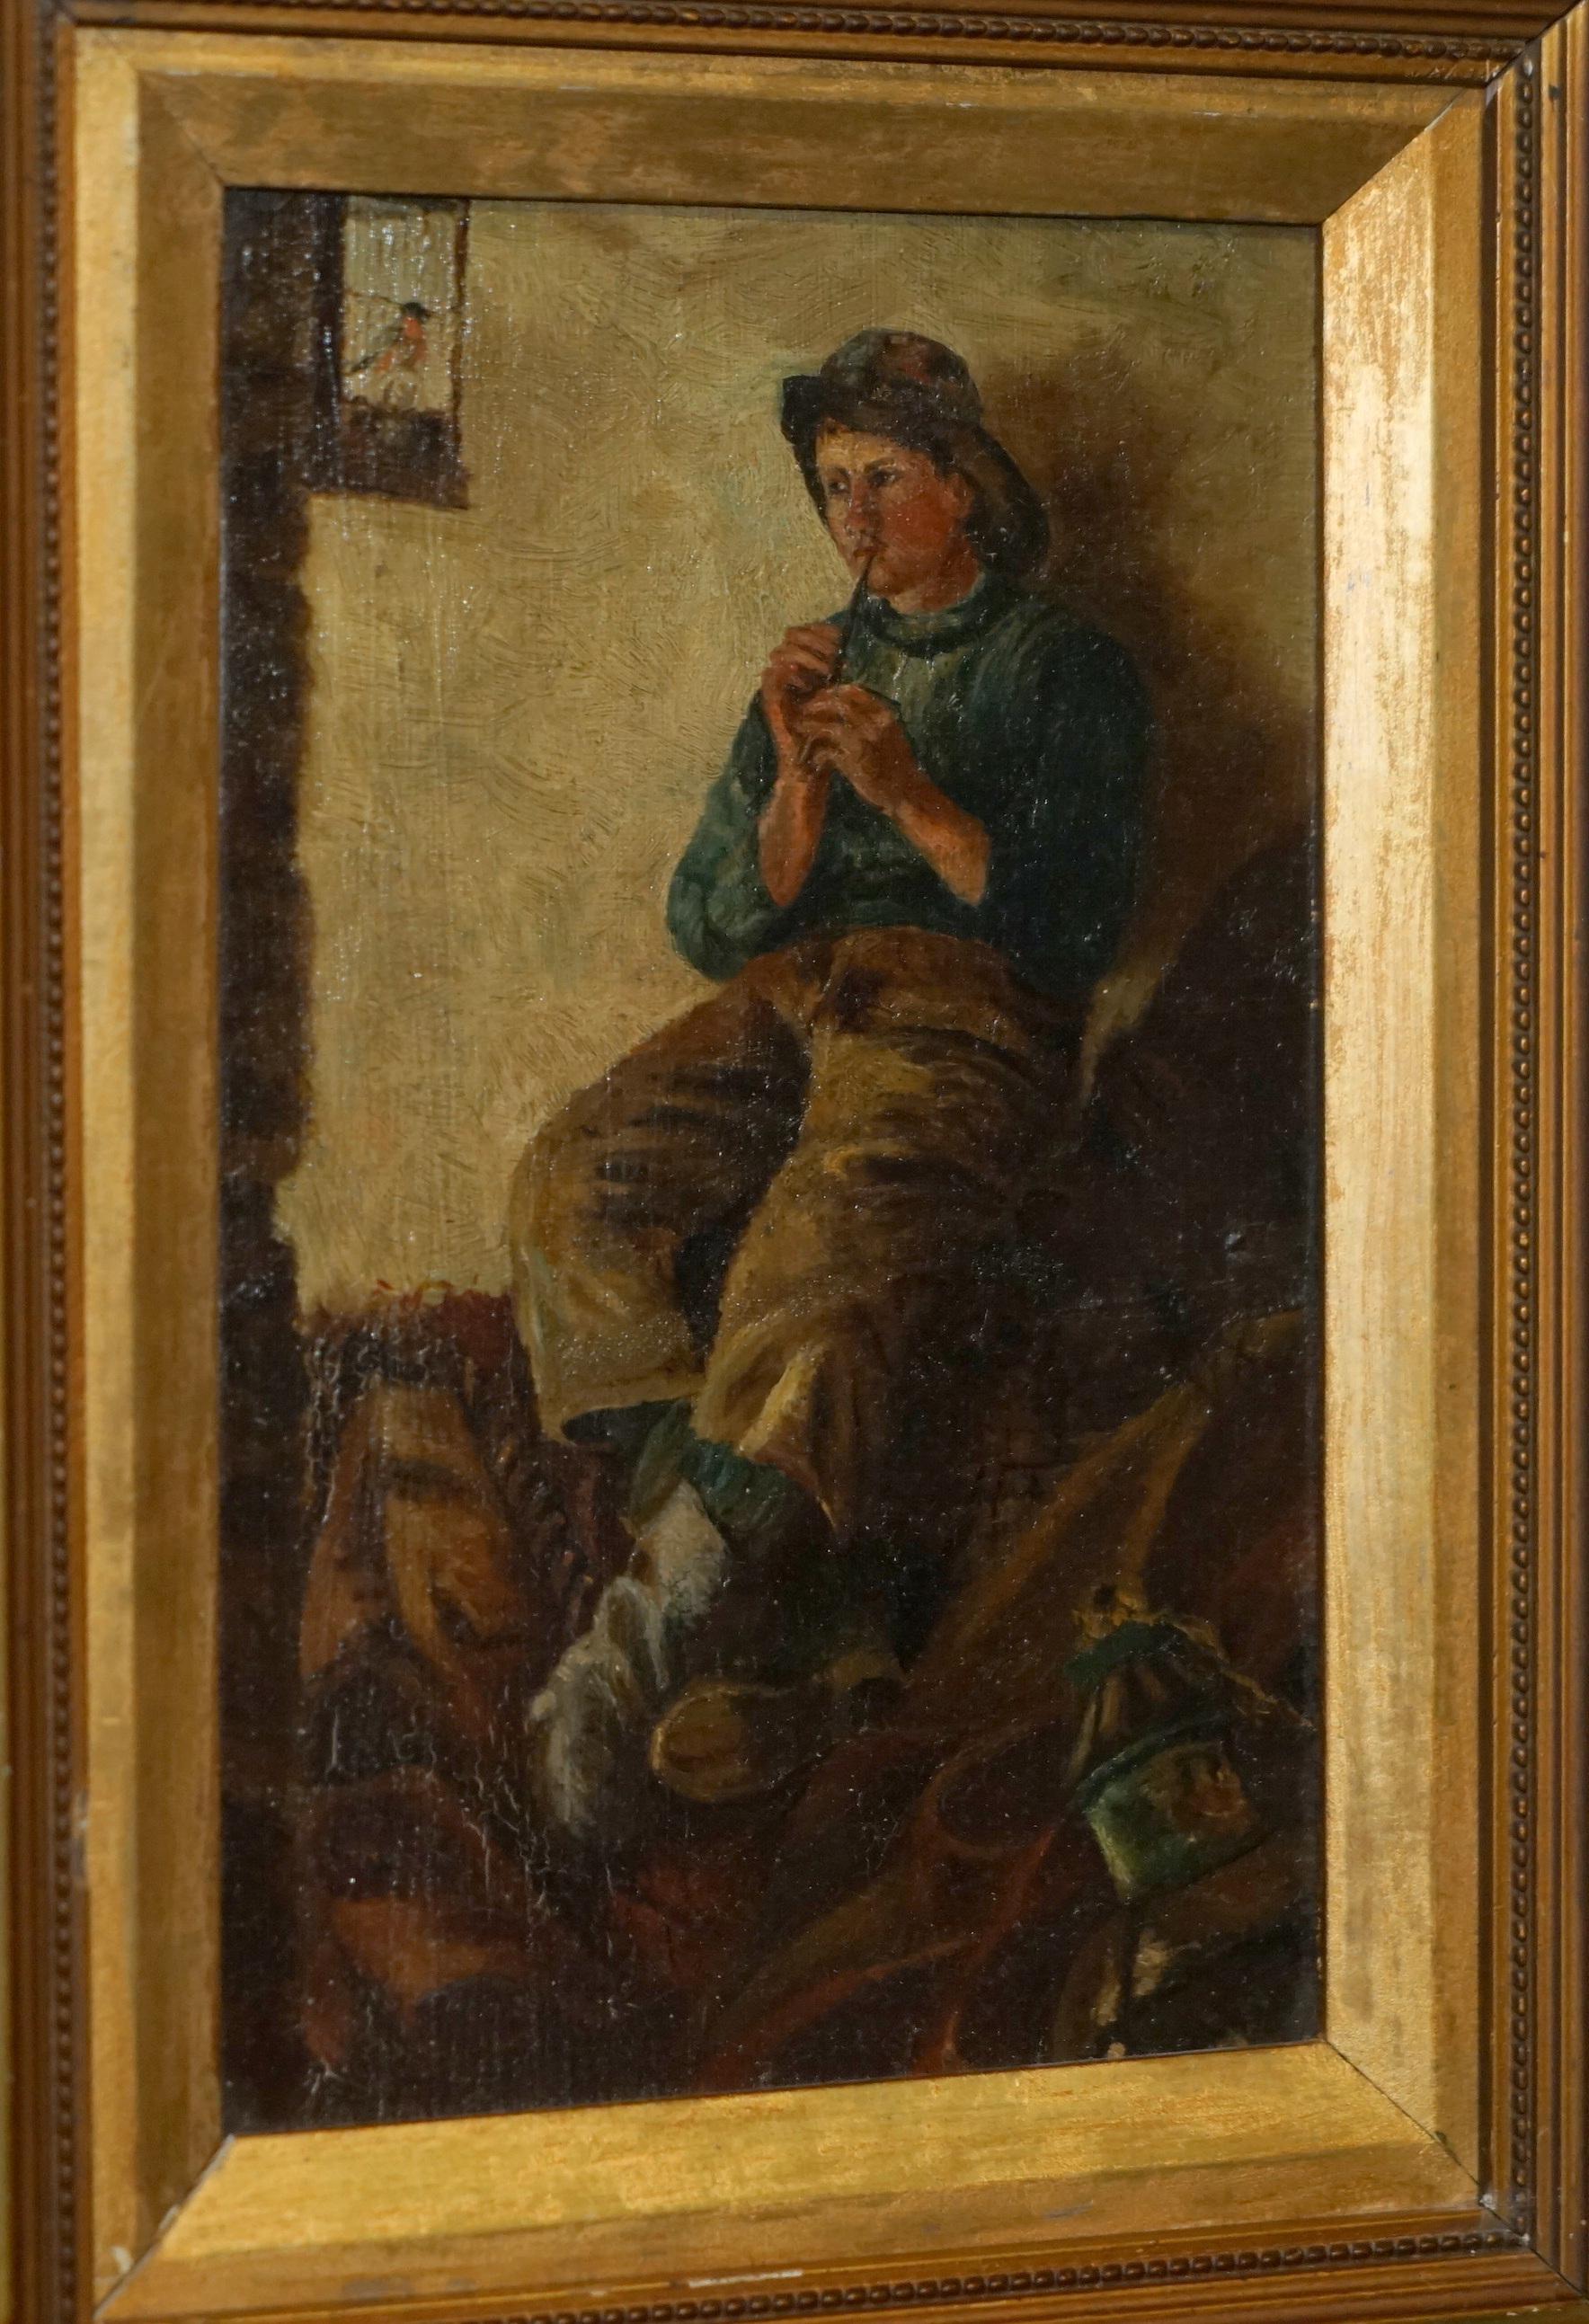 SUBLIME ANTIQUE ViCTORIAN OIL PAINTING OF A YOUNG BOY (FISHERMAN) PLAYING A PIPE (Hochviktorianisch) im Angebot